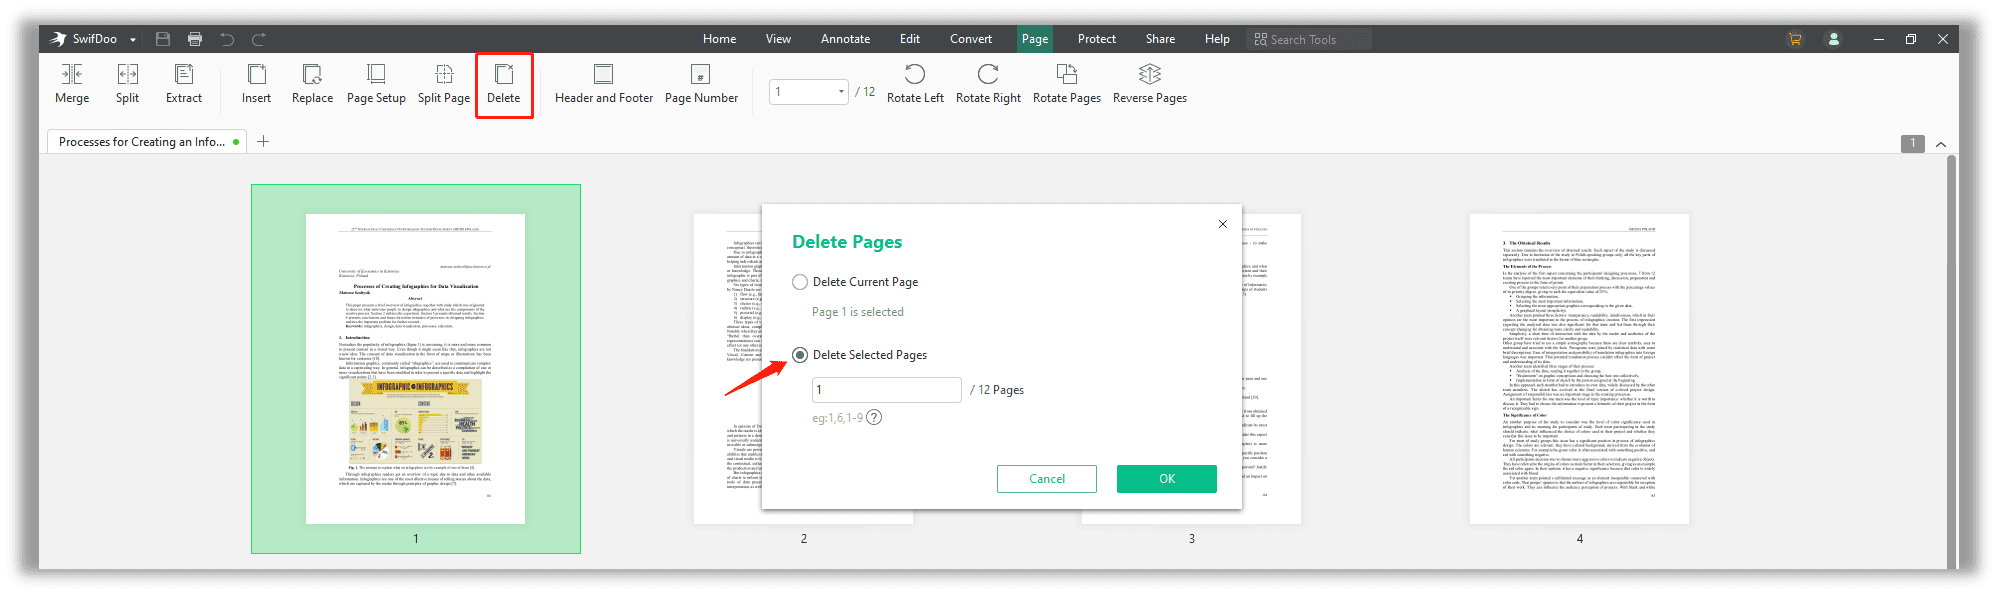 How to remove multiple pages from a PDF in SwifDoo PDF